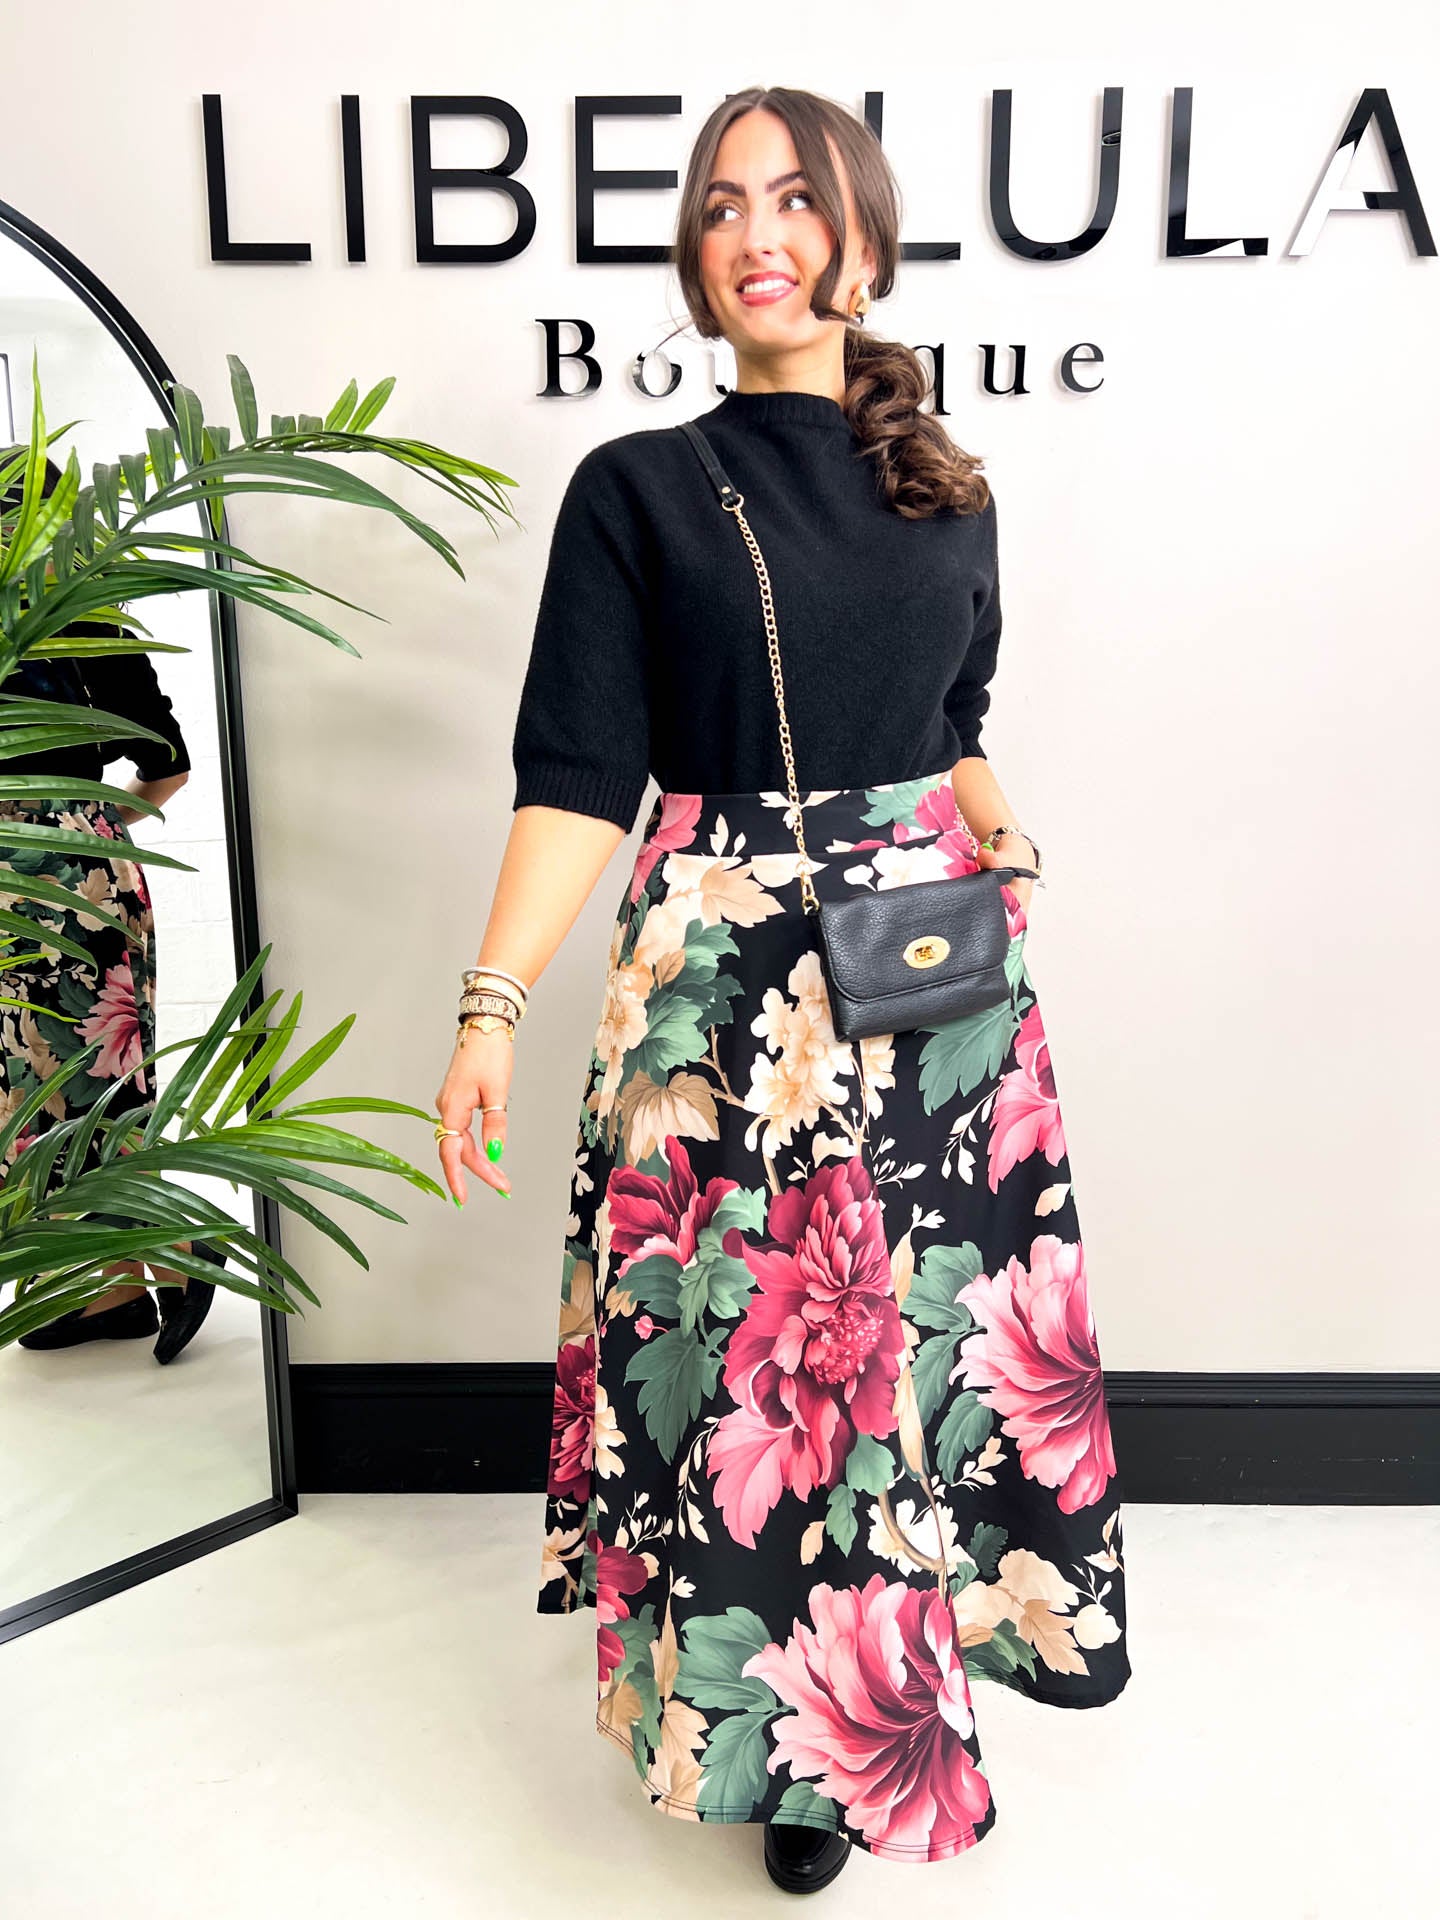 The Mabel Floral Print Skirt Review